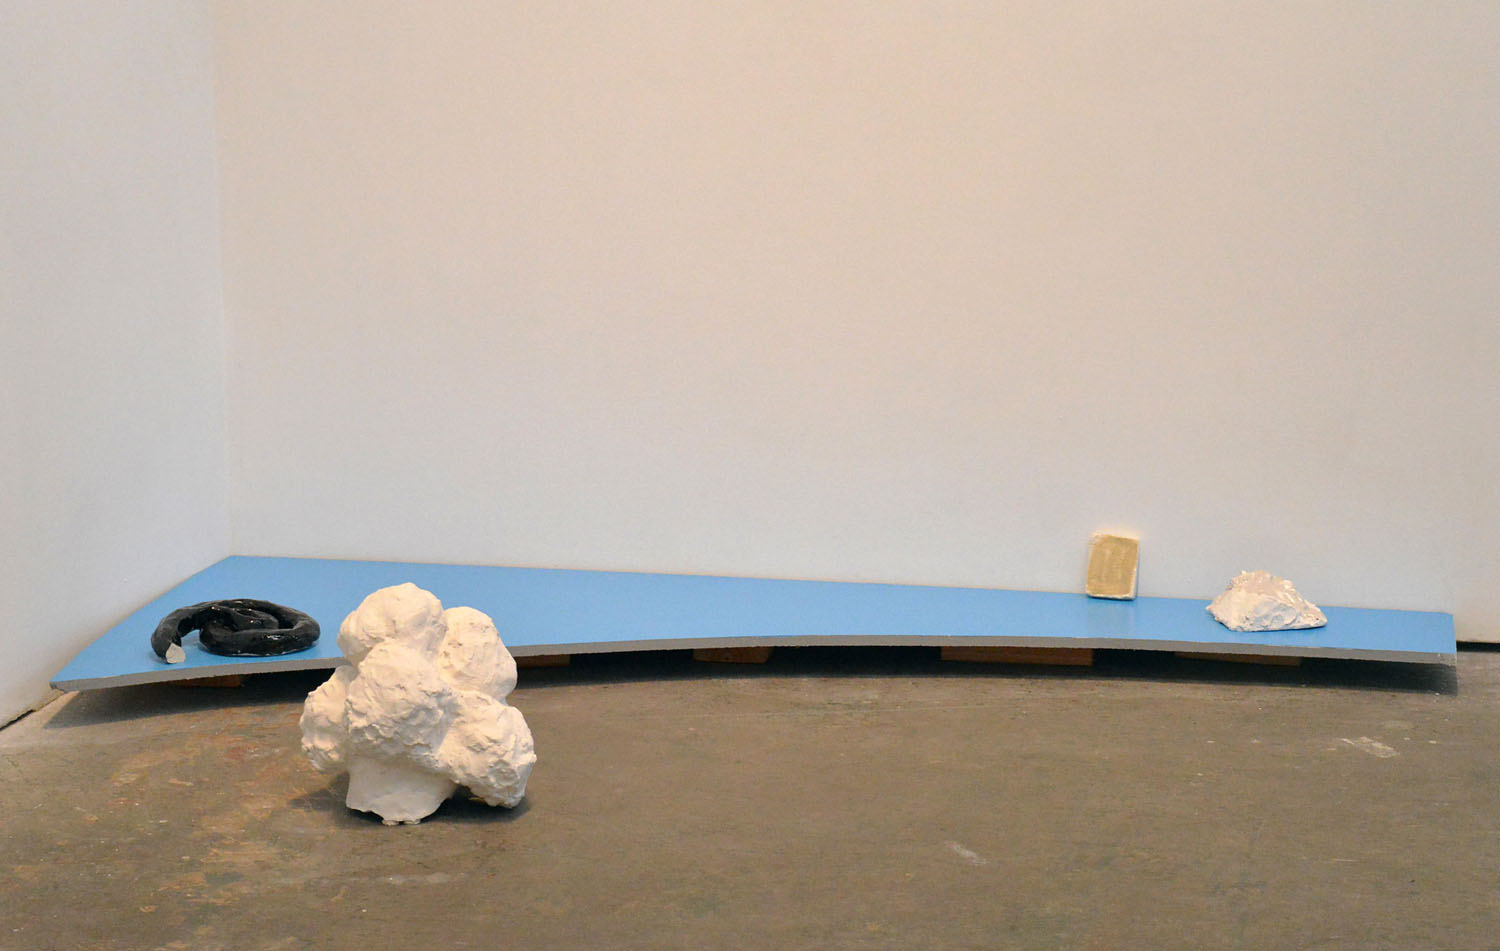   Untitled Floor Piece , 2014, glazed porcelain, glazed and painted ceramic, latex house paint, MDF, acrylic paint, 3.5 x 62 x 26 inches 